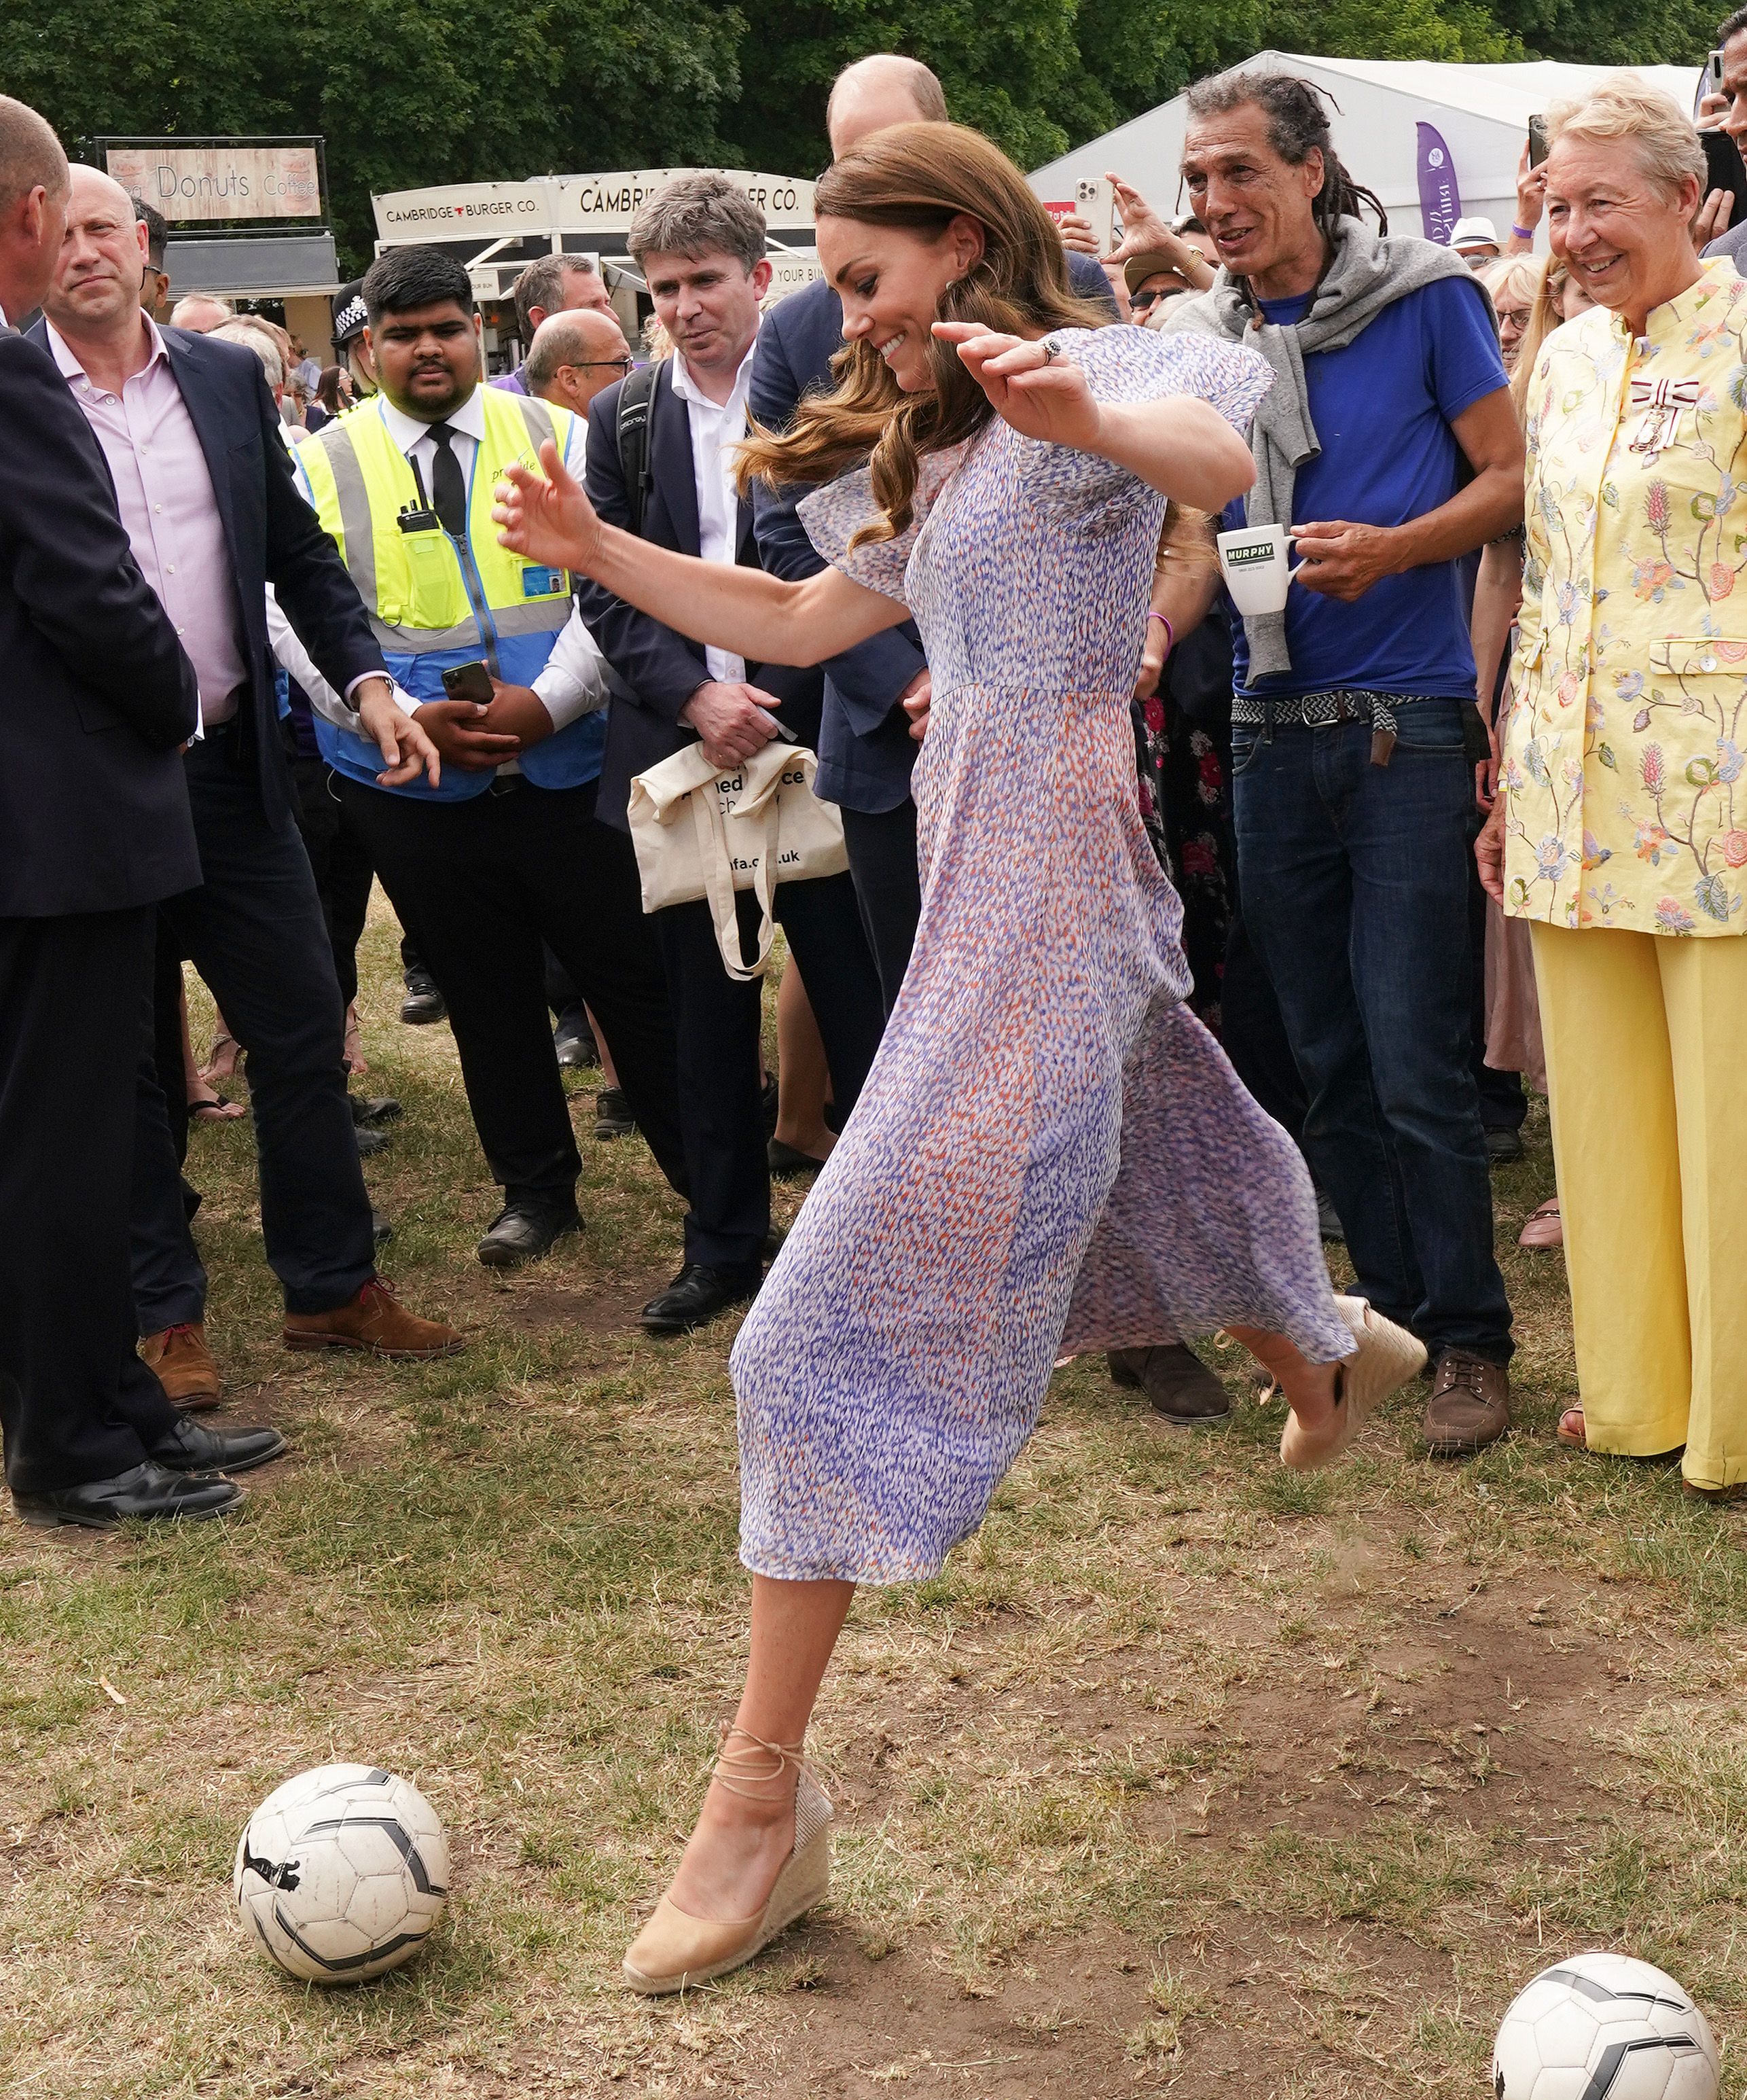 Here's Kate Middleton Kicking a Soccer Ball in Heels Like a Pro